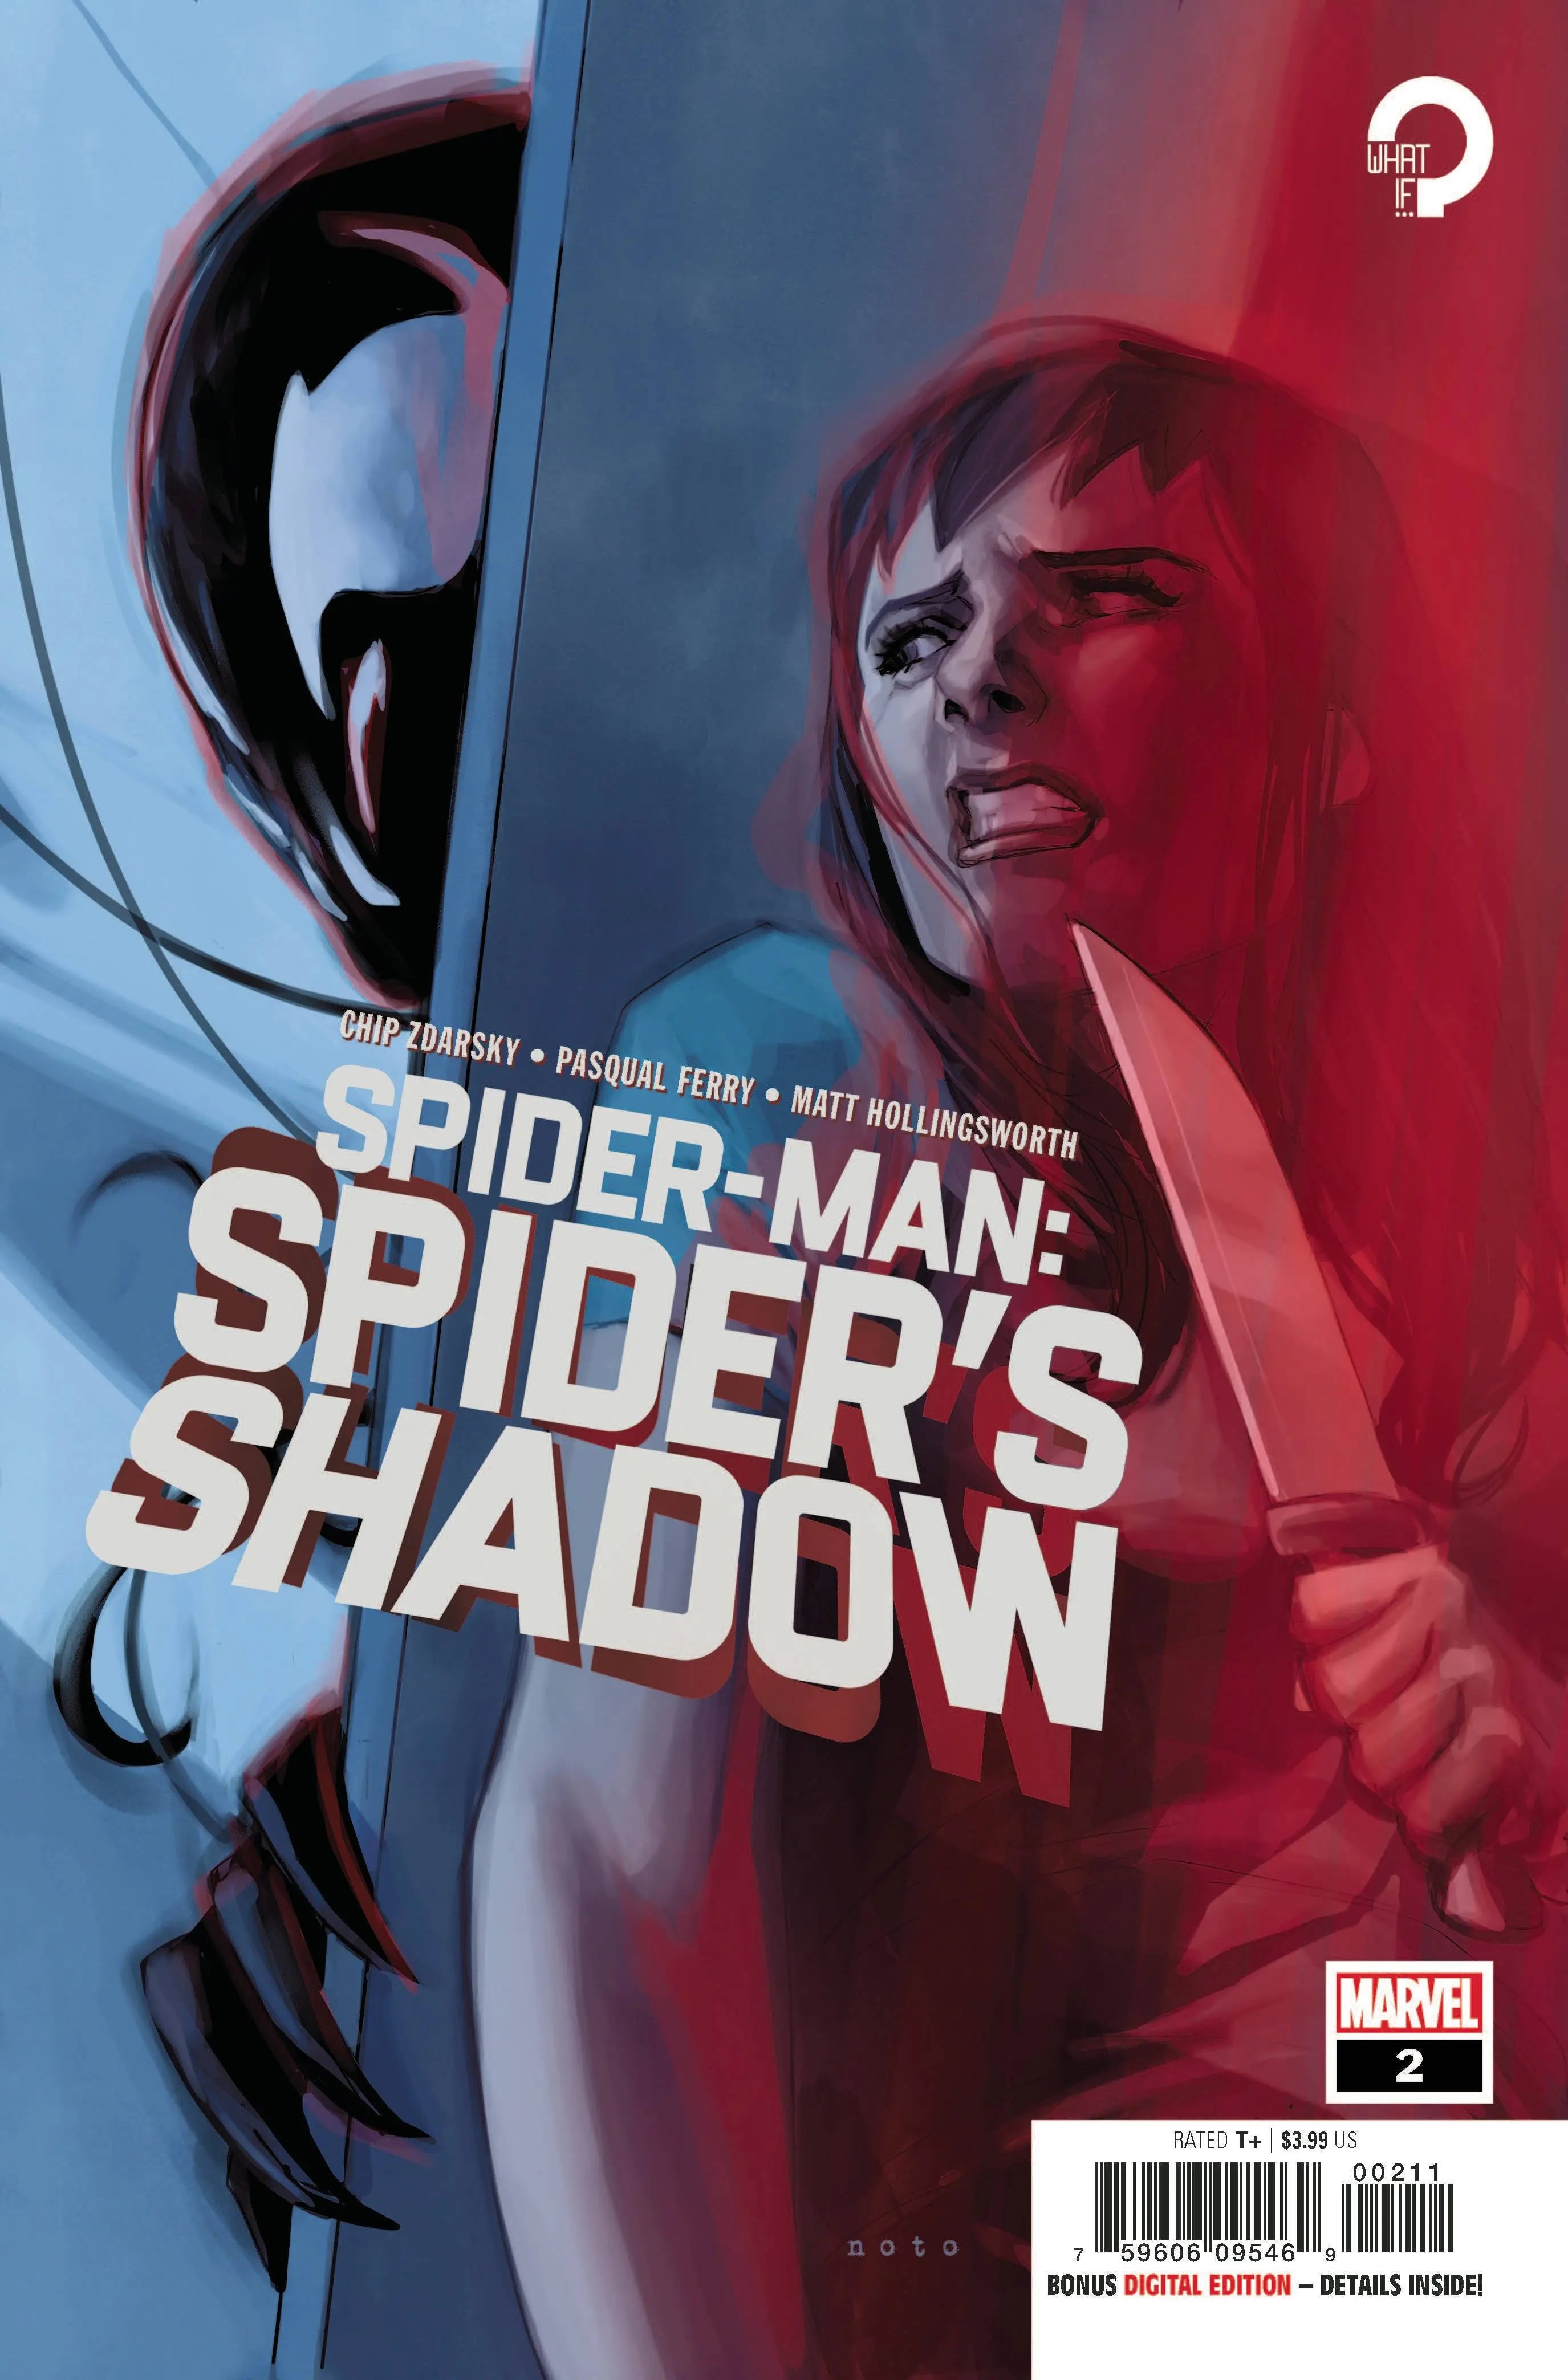 Spider-Man Spiders Shadow #2 (OF 5) King Gaming